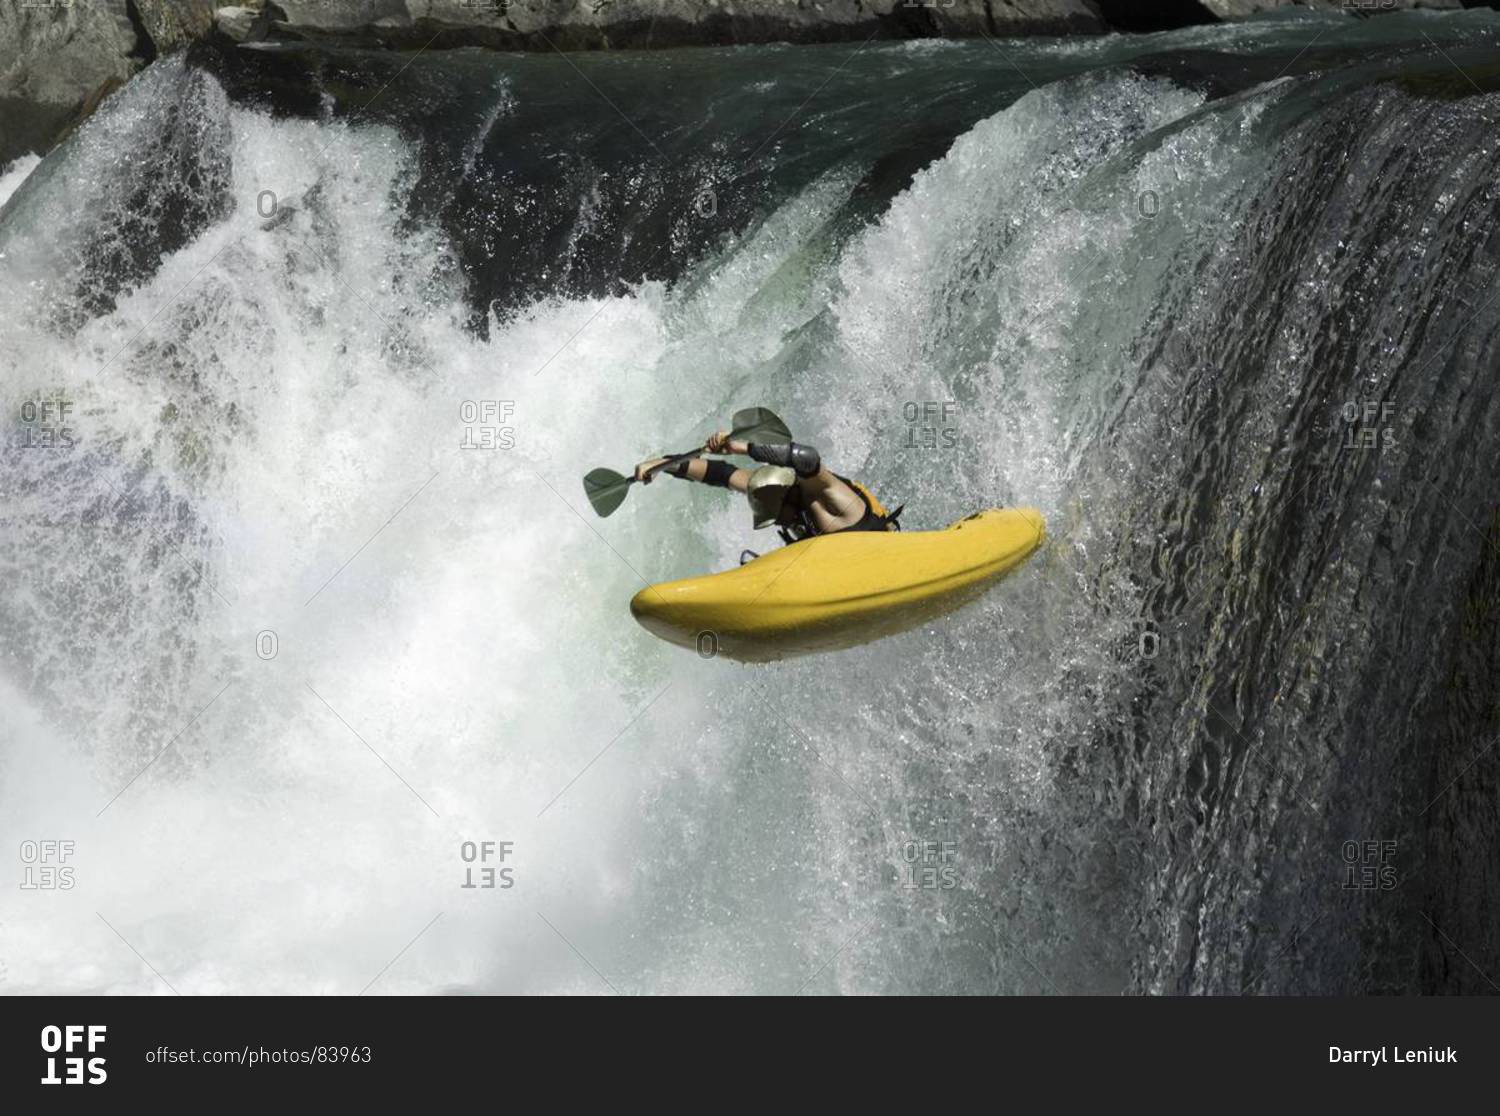 Male kayaker going over a waterfall